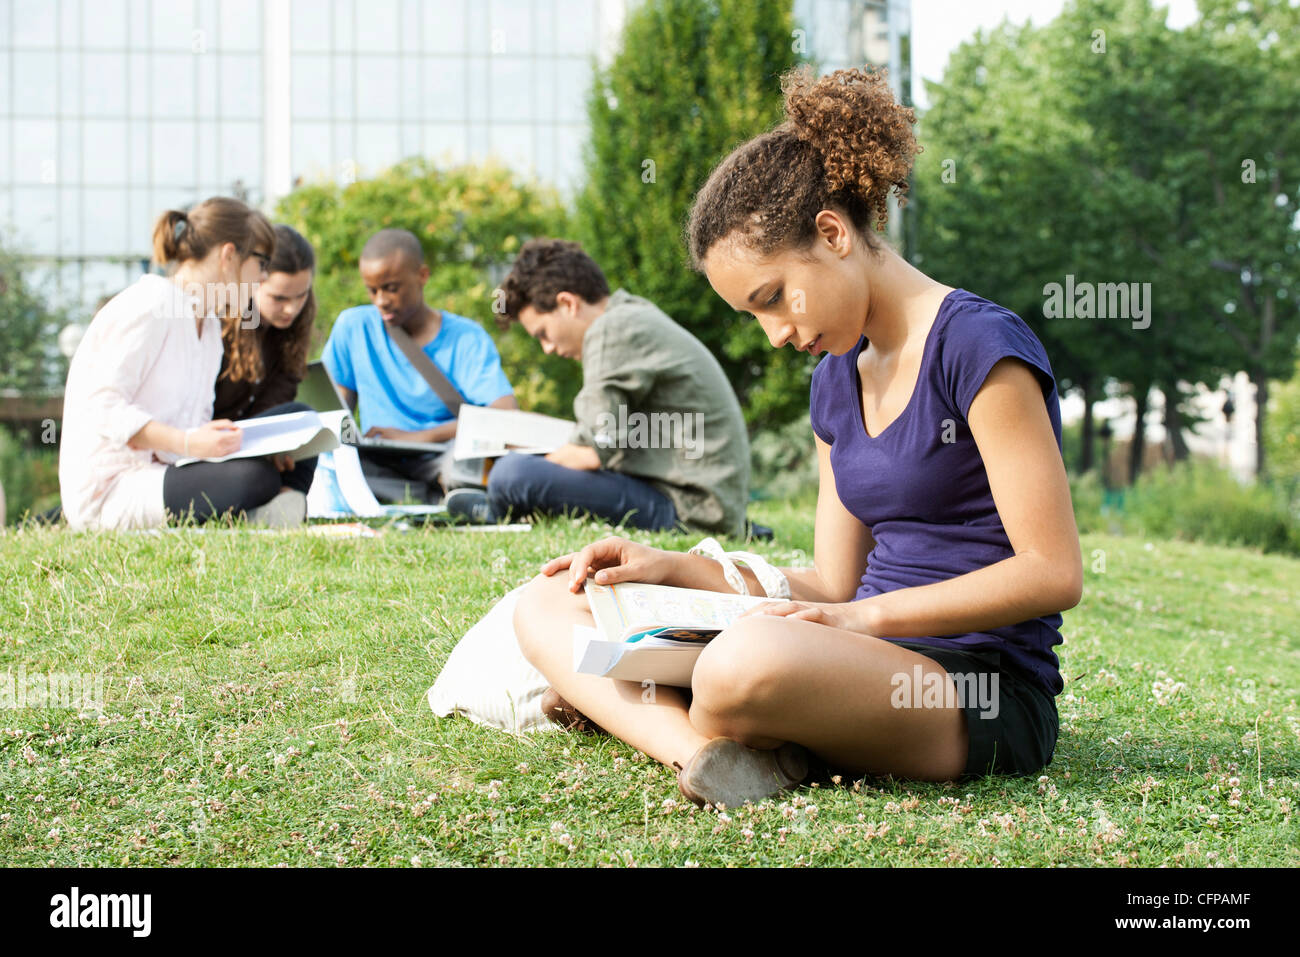 Young woman reading book on grass, group of young people in background Stock Photo